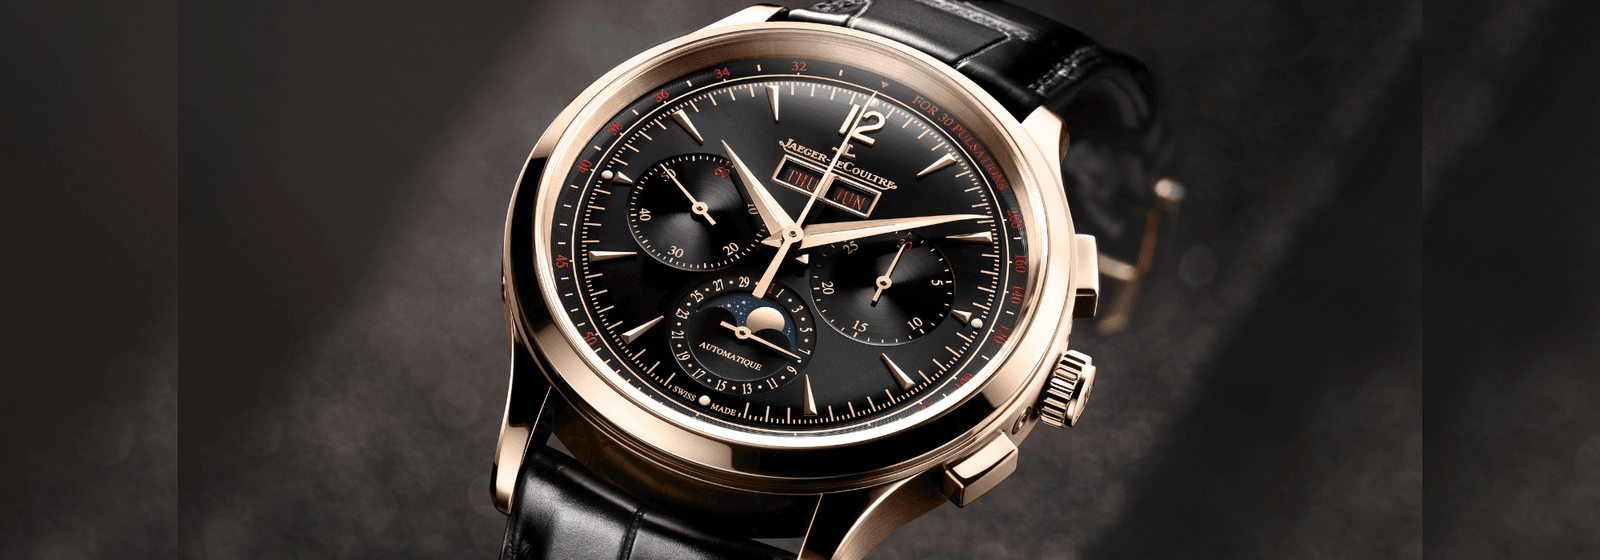 Jaeger-LeCoultre Master Control Chronograph Calendar In Pink-Gold